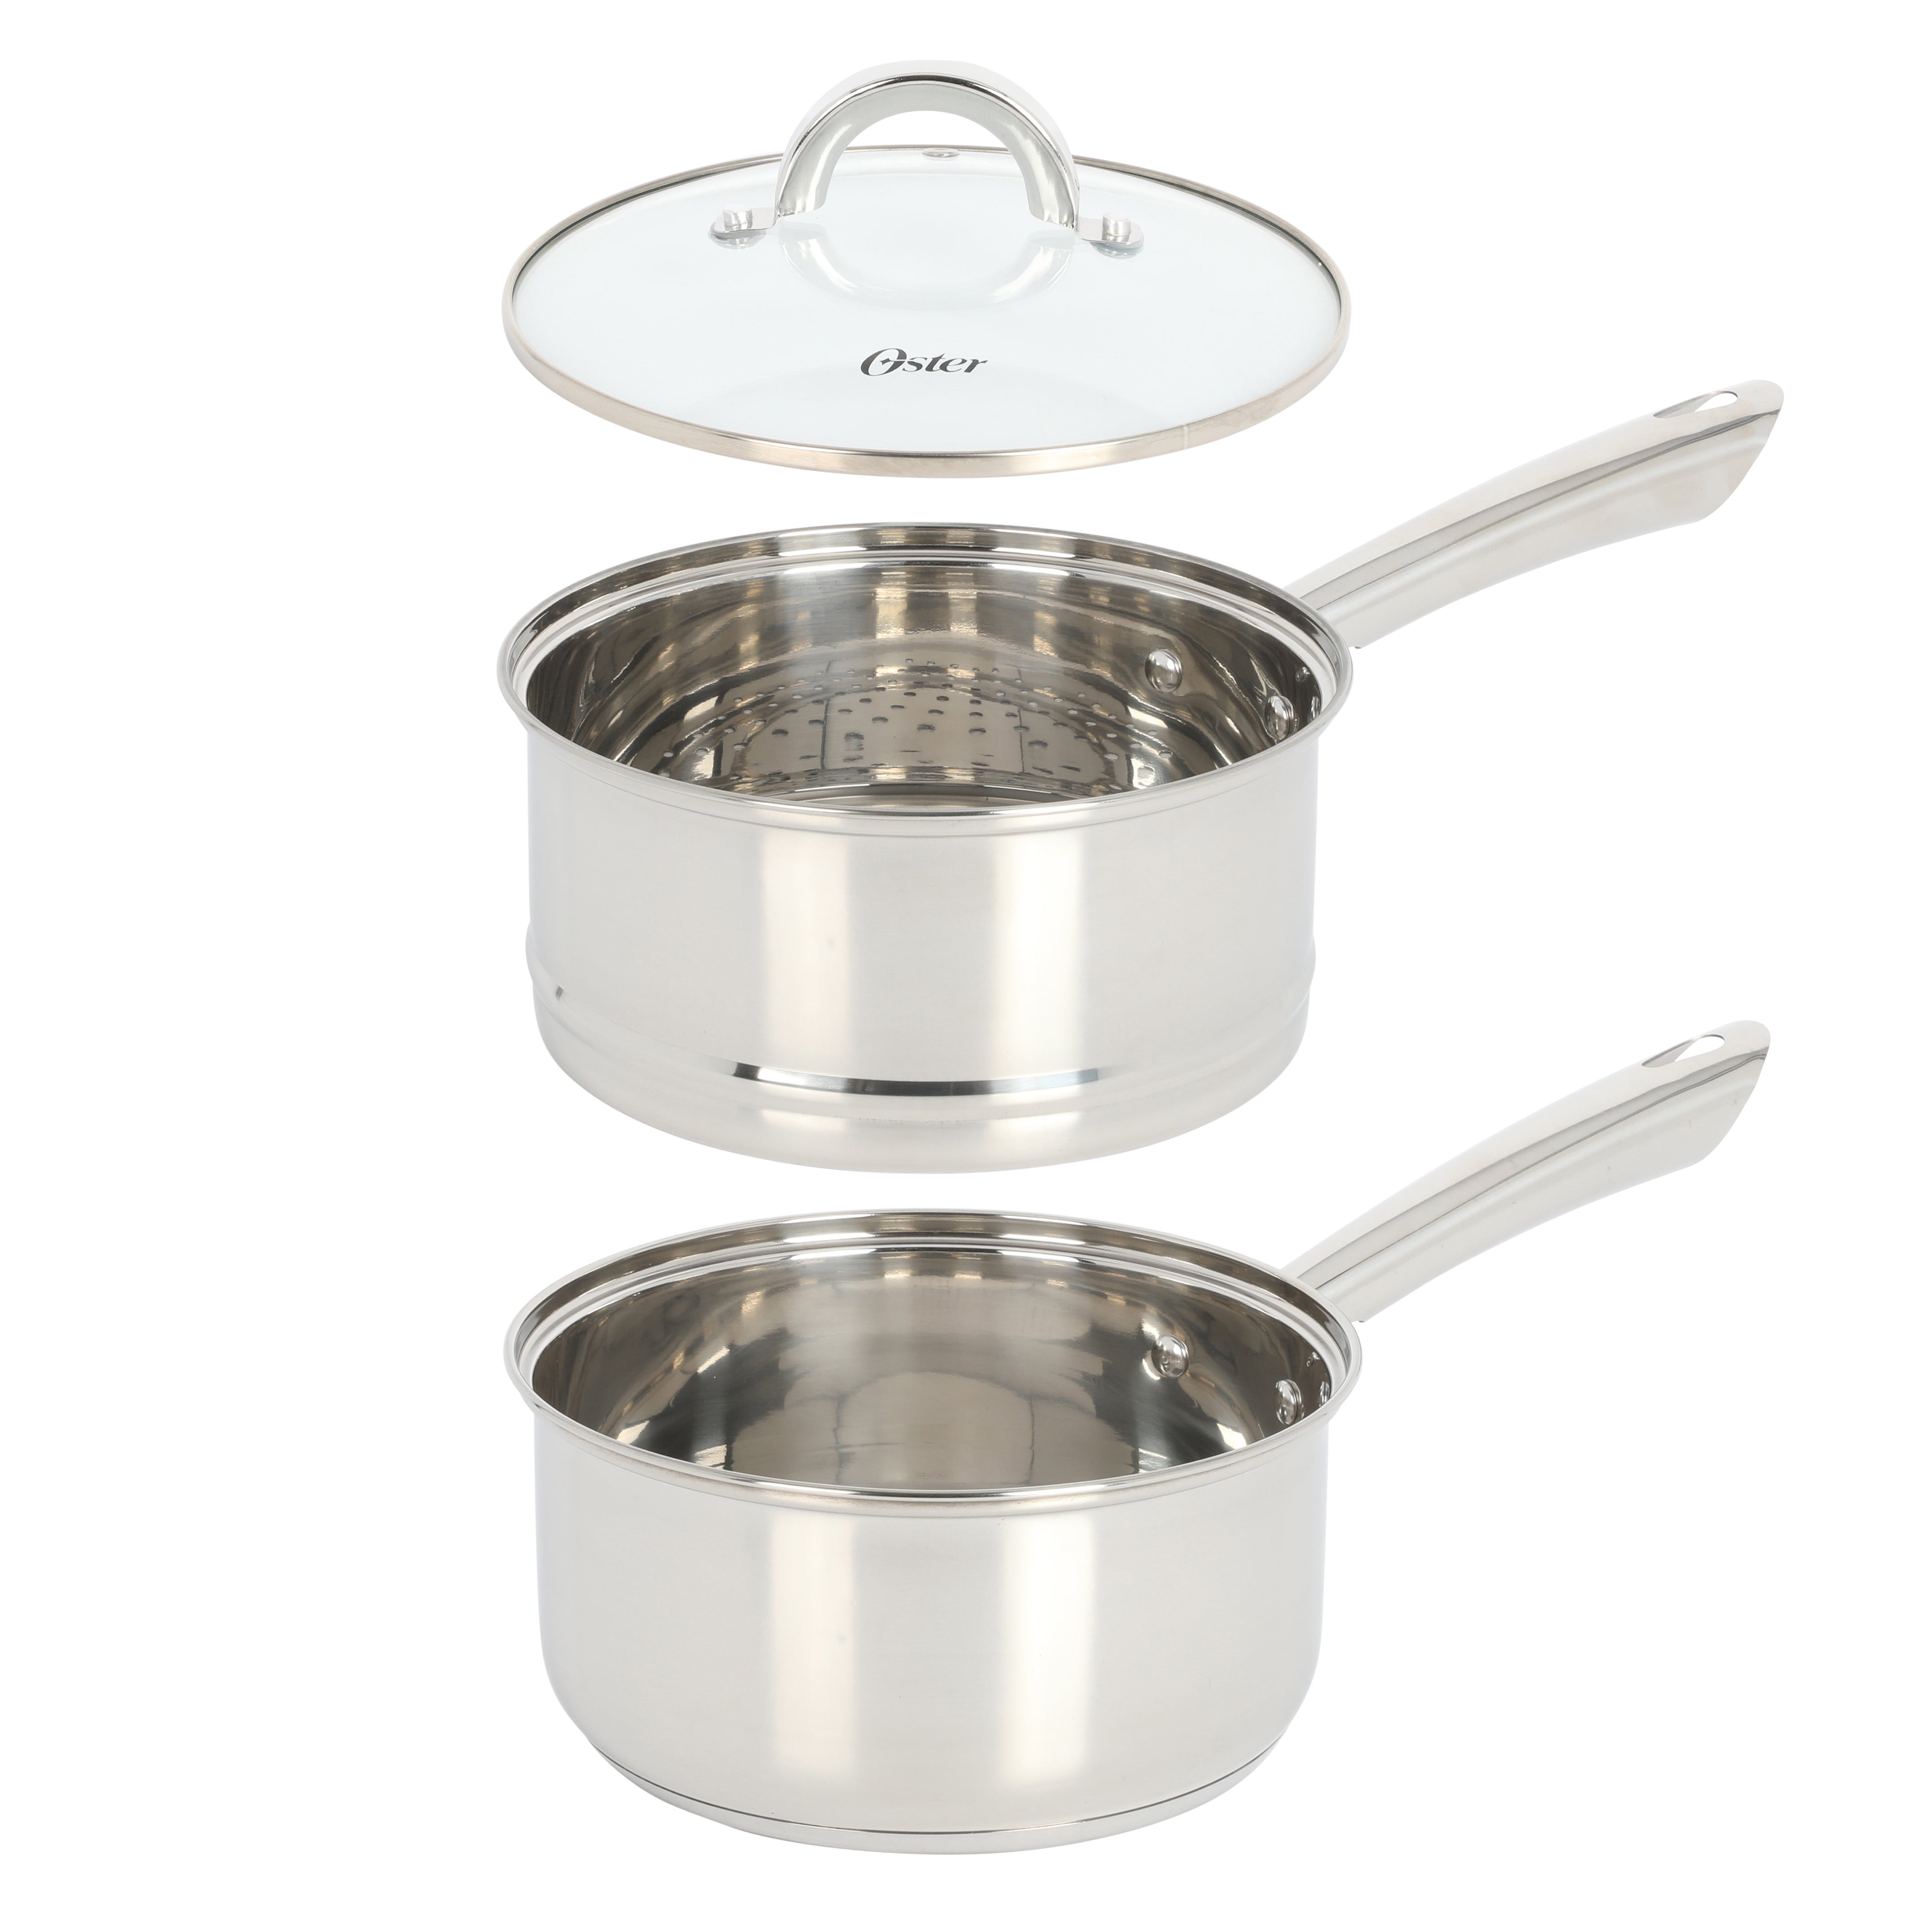 Bloomhouse 12-Piece Tri-Ply Stainless Steel Cookware Set